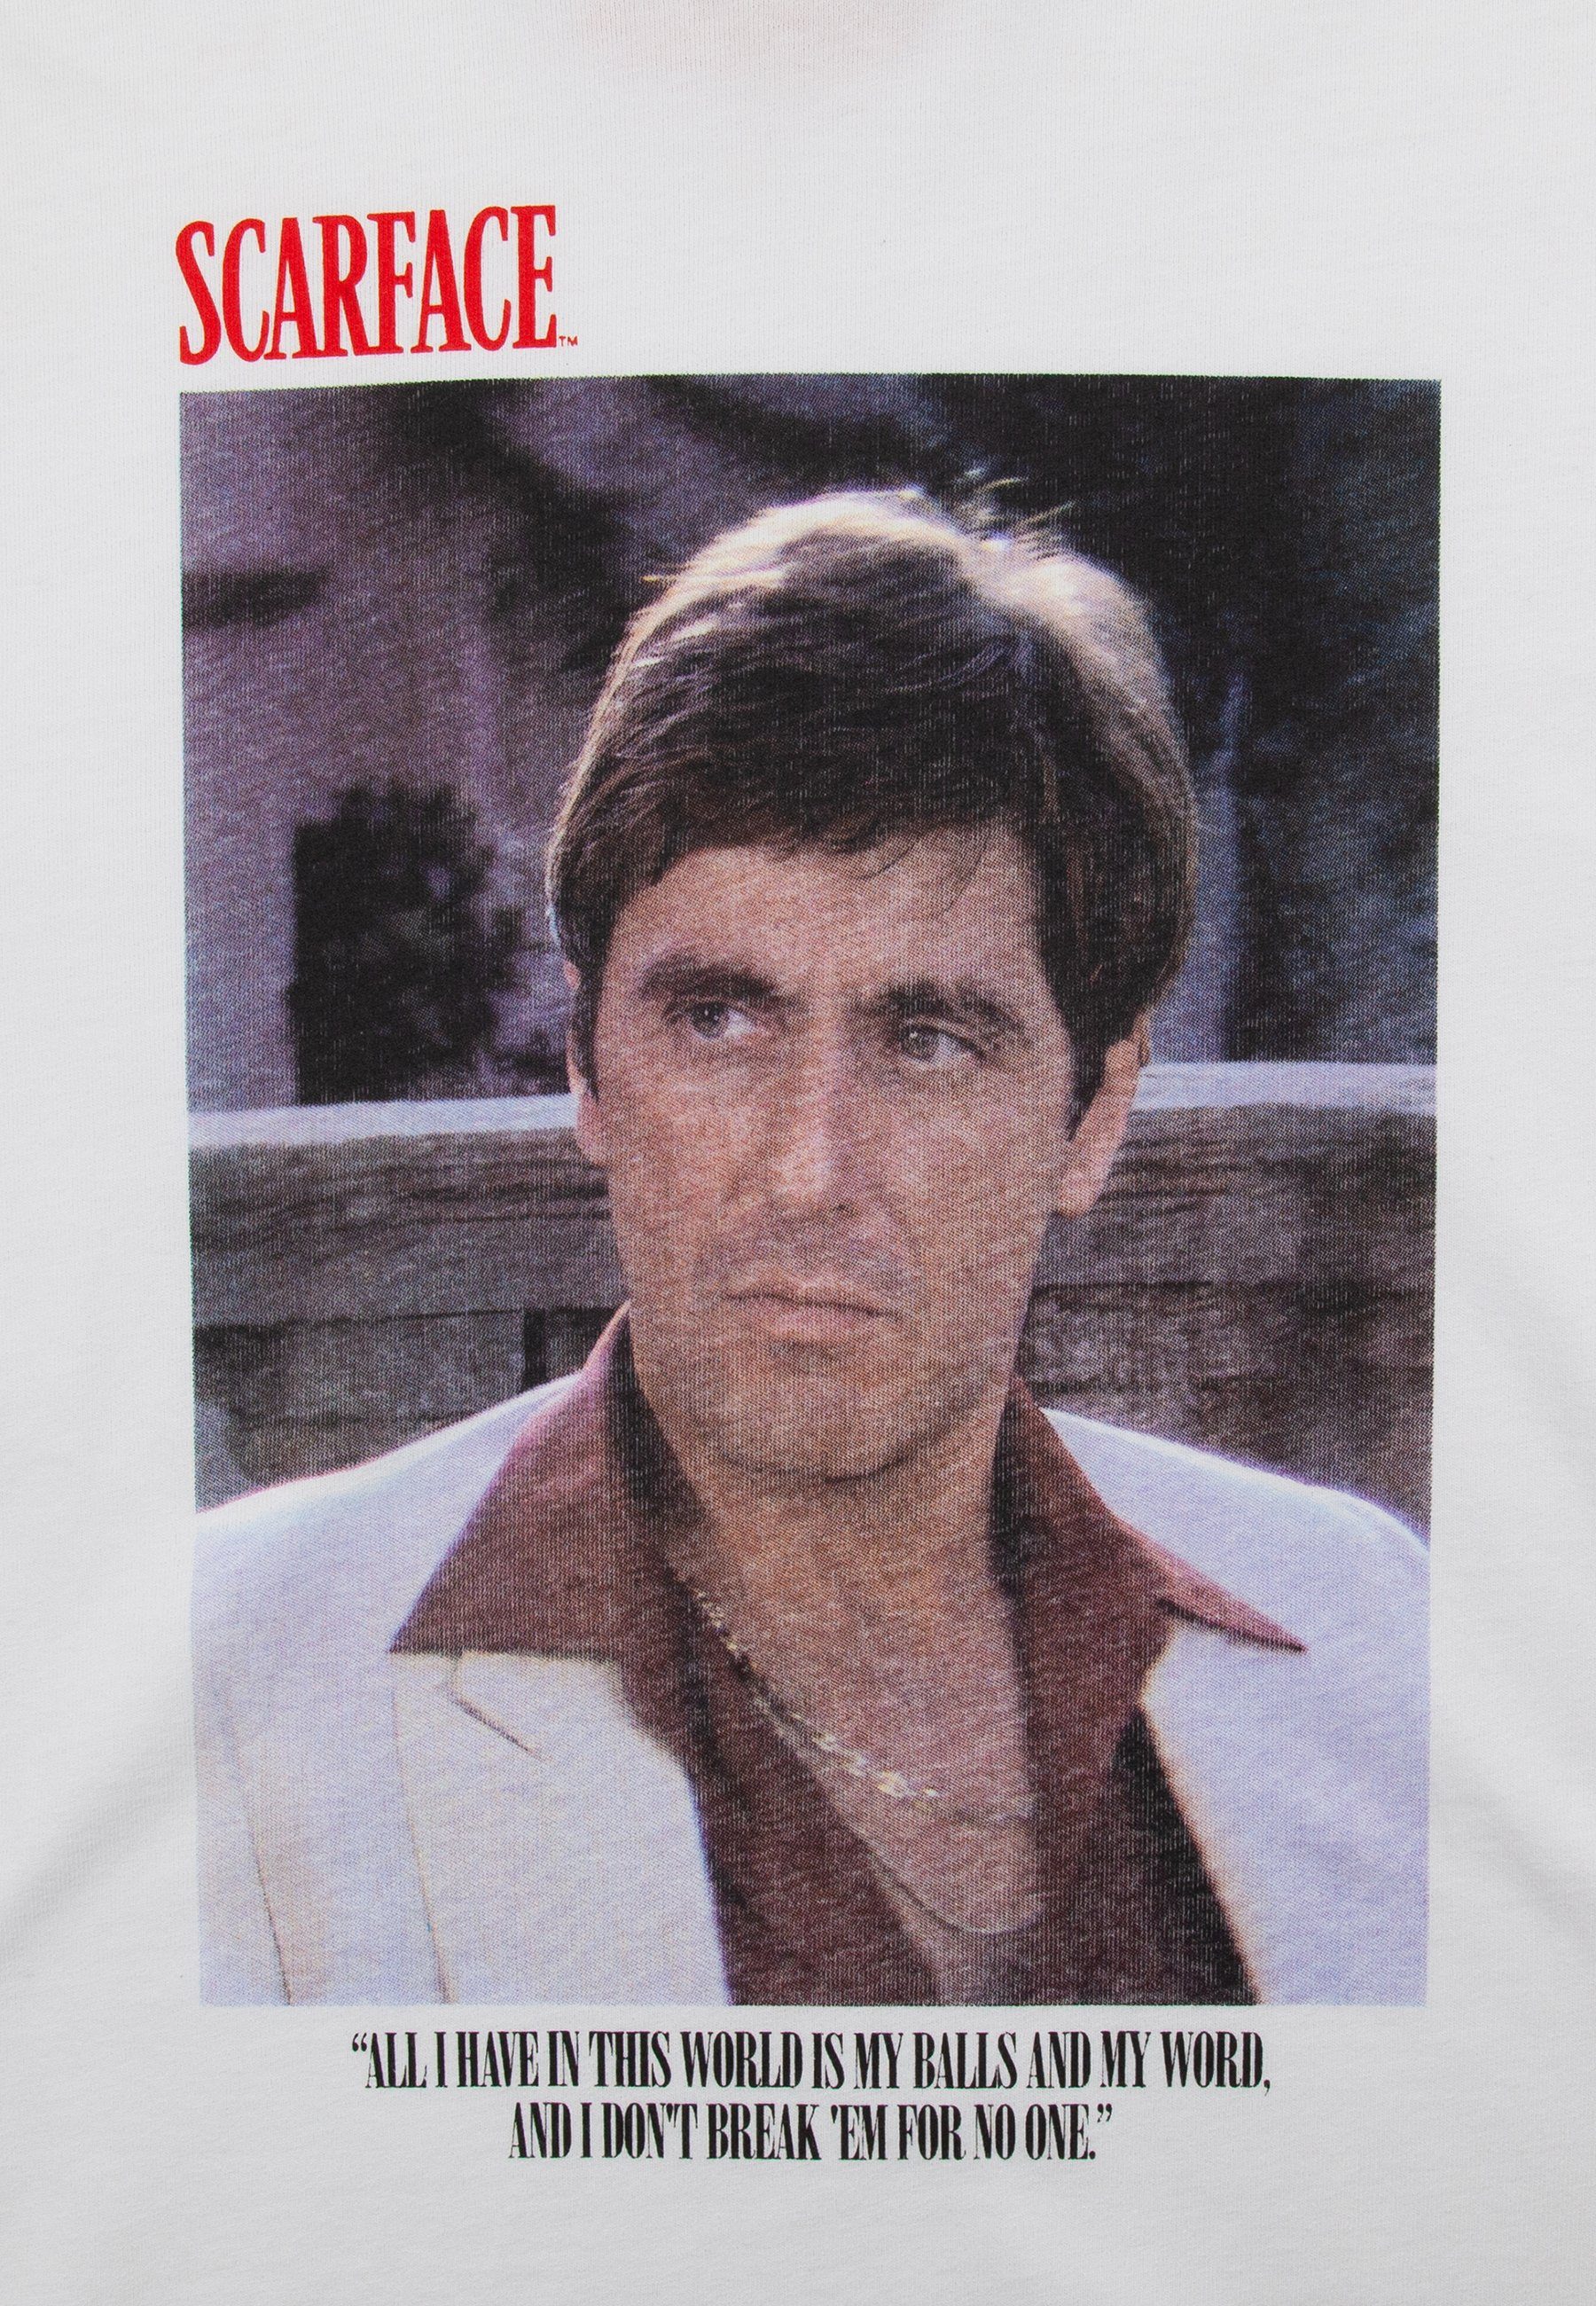 this I 'All in GOTS have world' zertifizierte Recovered Bio-Baumwolle T-Shirt Scarface